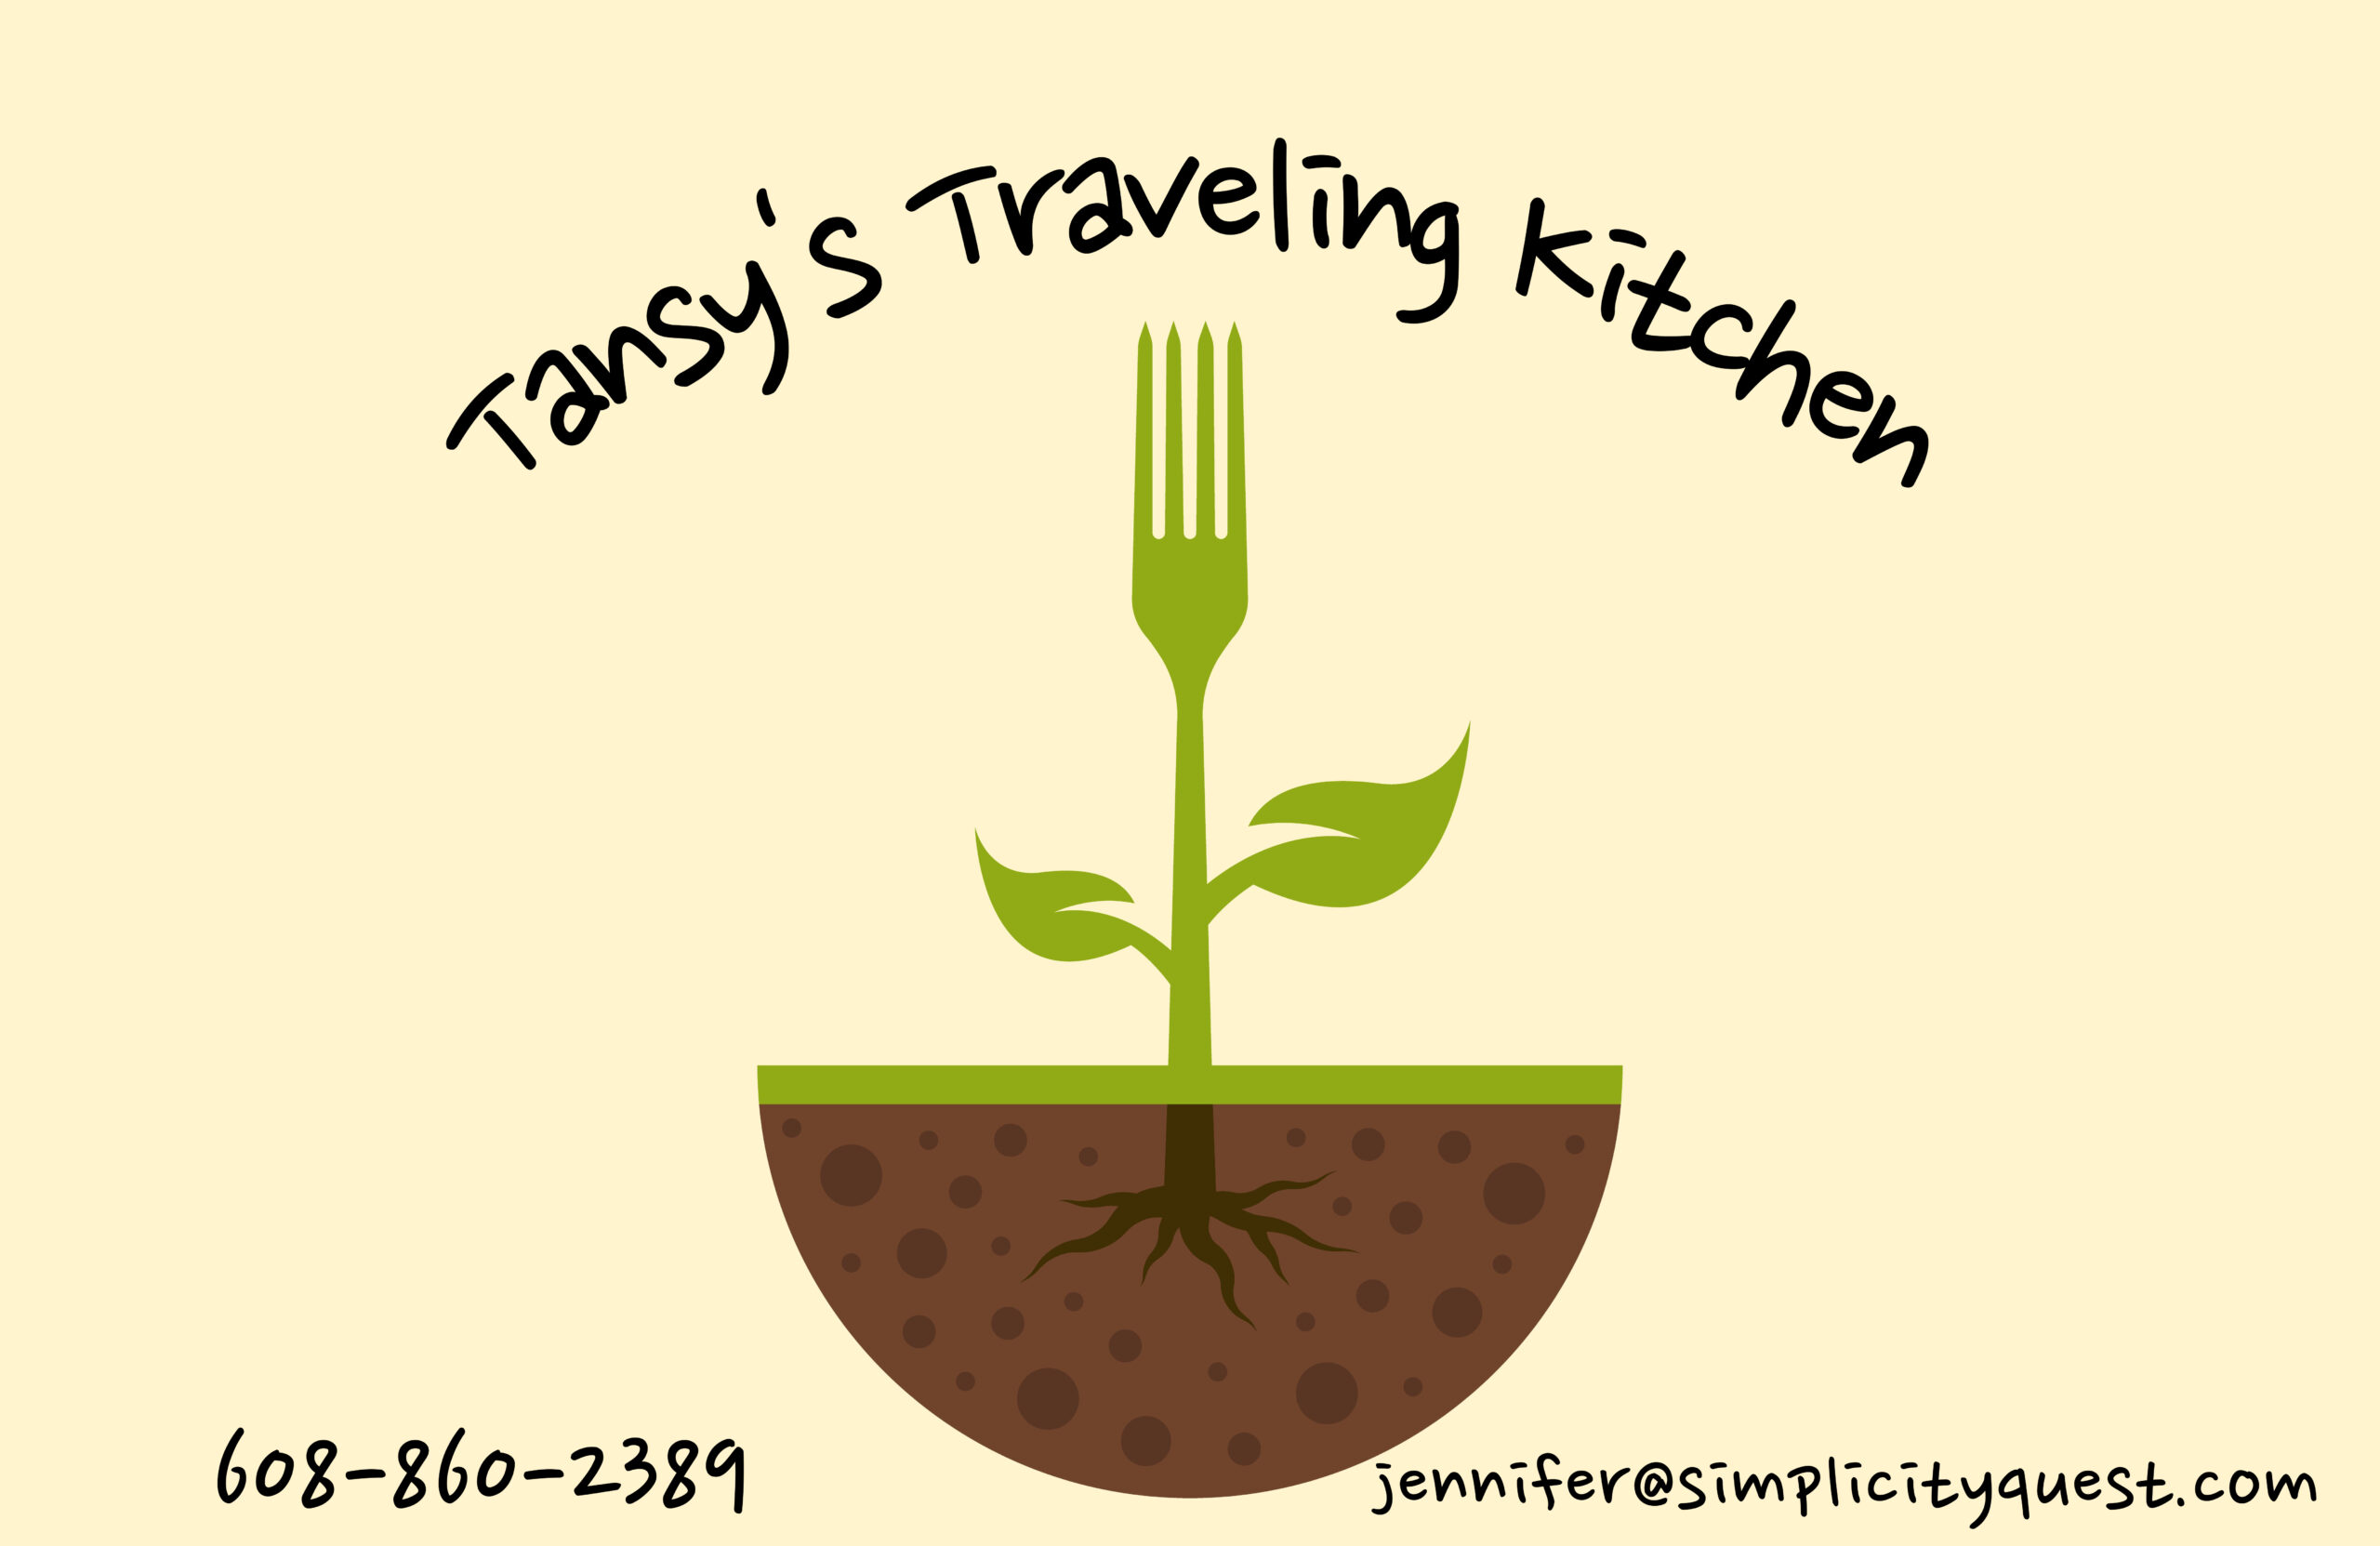 Tansy's Traveling Kitchen